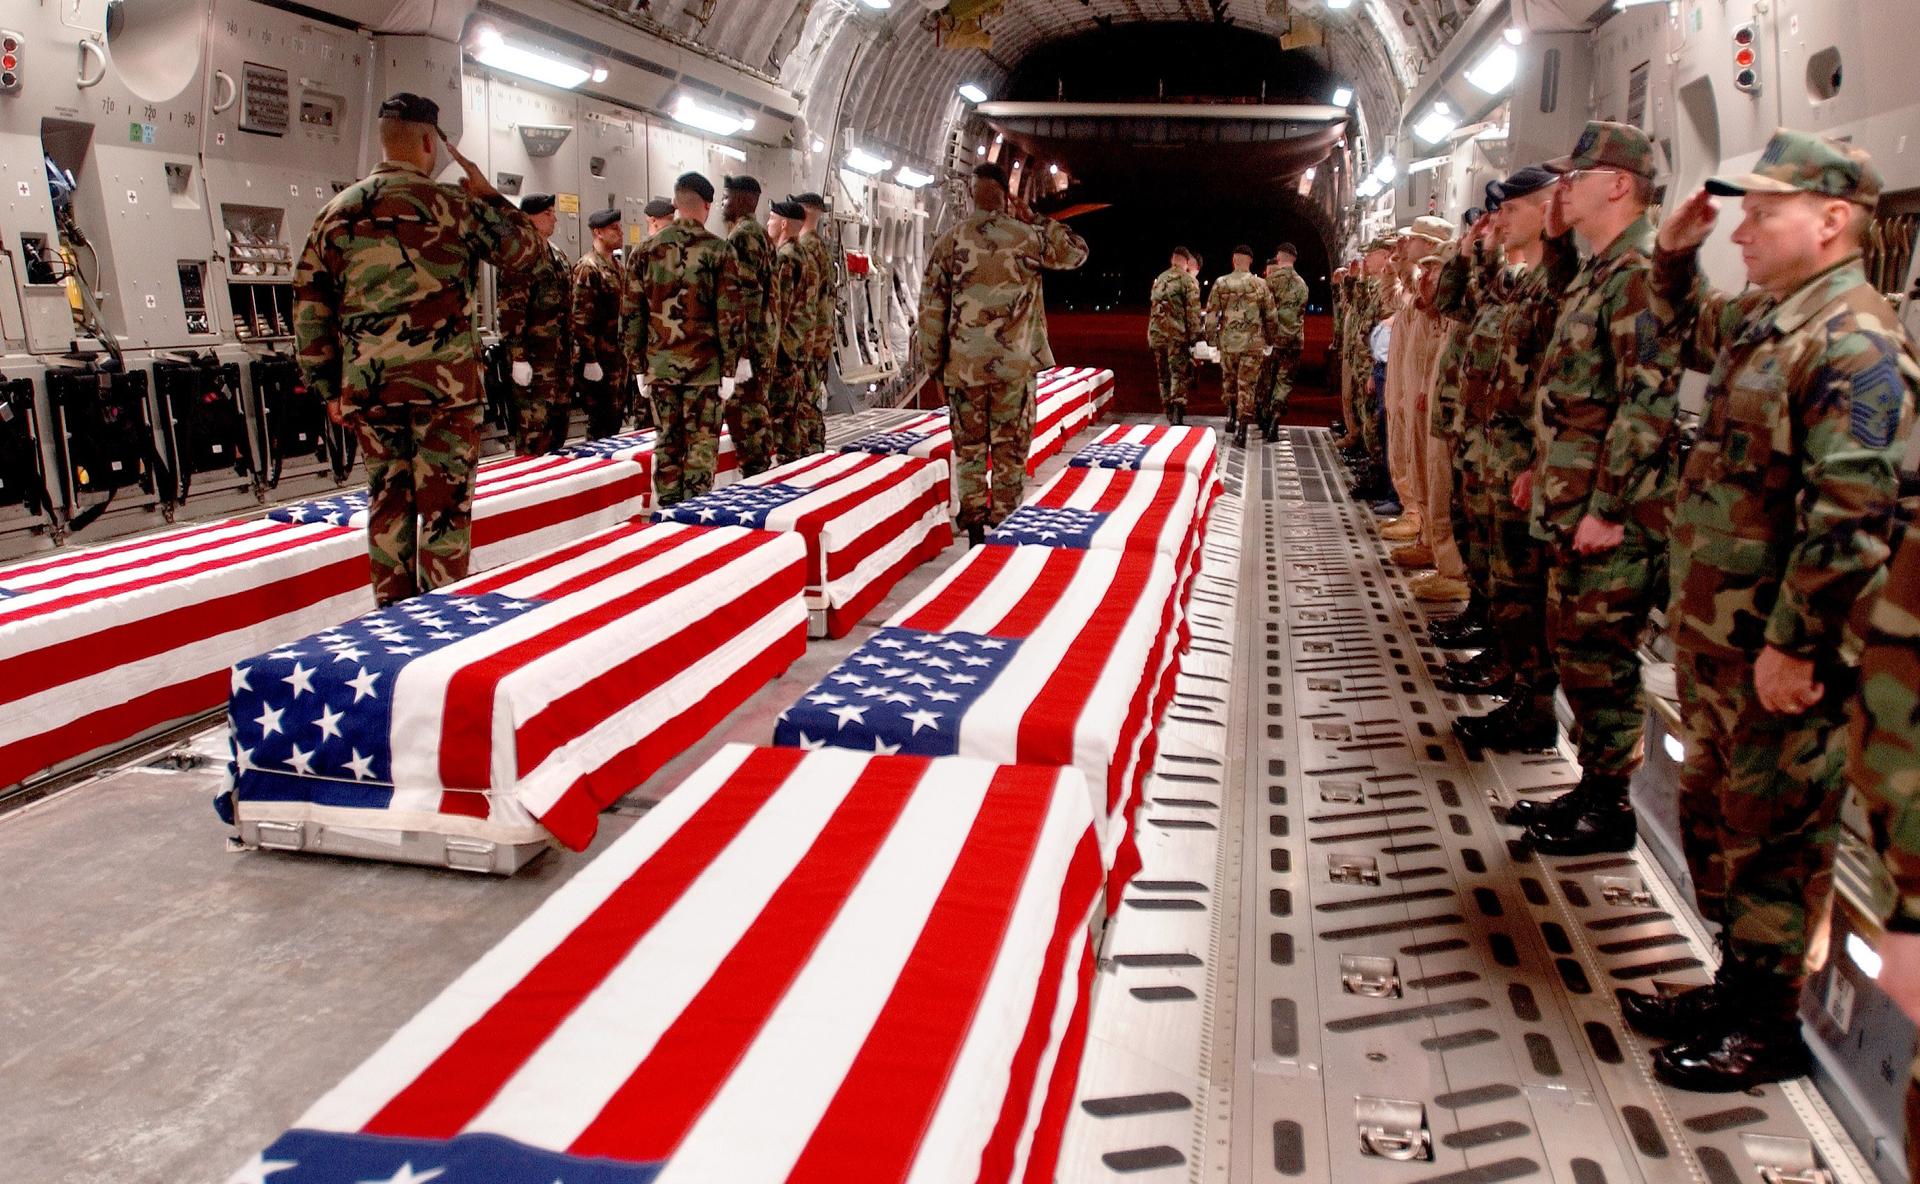 Coffins of US military personnel are prepared to be offloaded at Dover Air Force Base in Dover, Delaware in this undated photo. From 1991 to 2009, the government did not permit photographing the return of servicemembers killed in action.